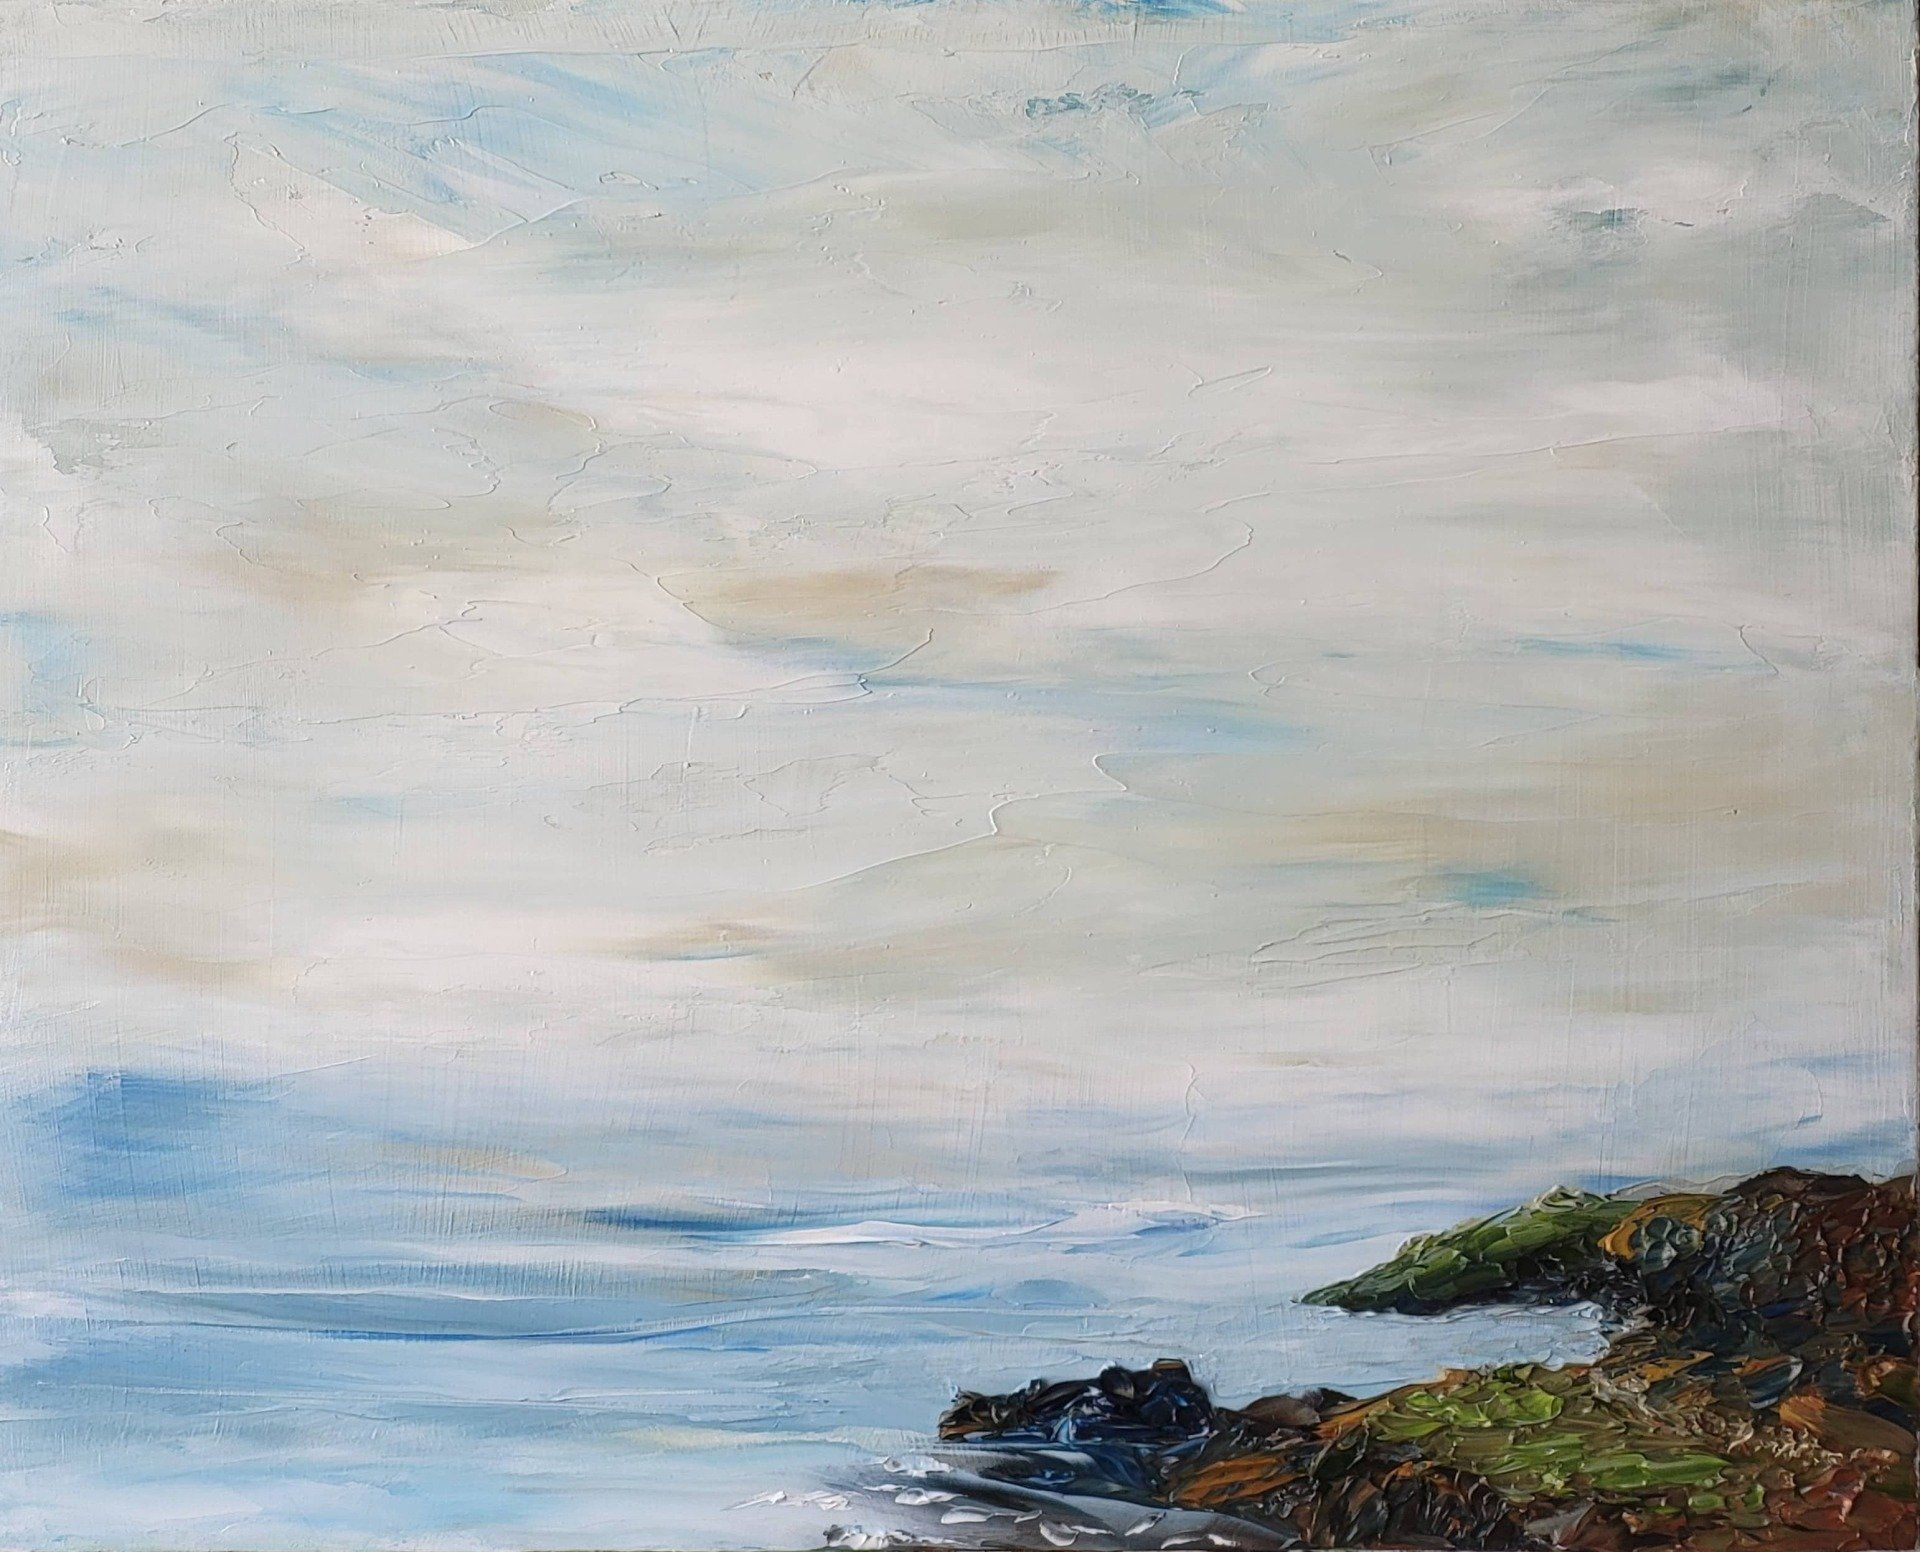 This is an oil on Masonite 10 in. x 8 in. Arrive in the cove you notice the vegetation and the earth tone rocky shoreline.. The sky is a subtle blend of blue, white, and a touch of buff white. A calm sea and the comforting cove  are the features of this piece that say come and relax.